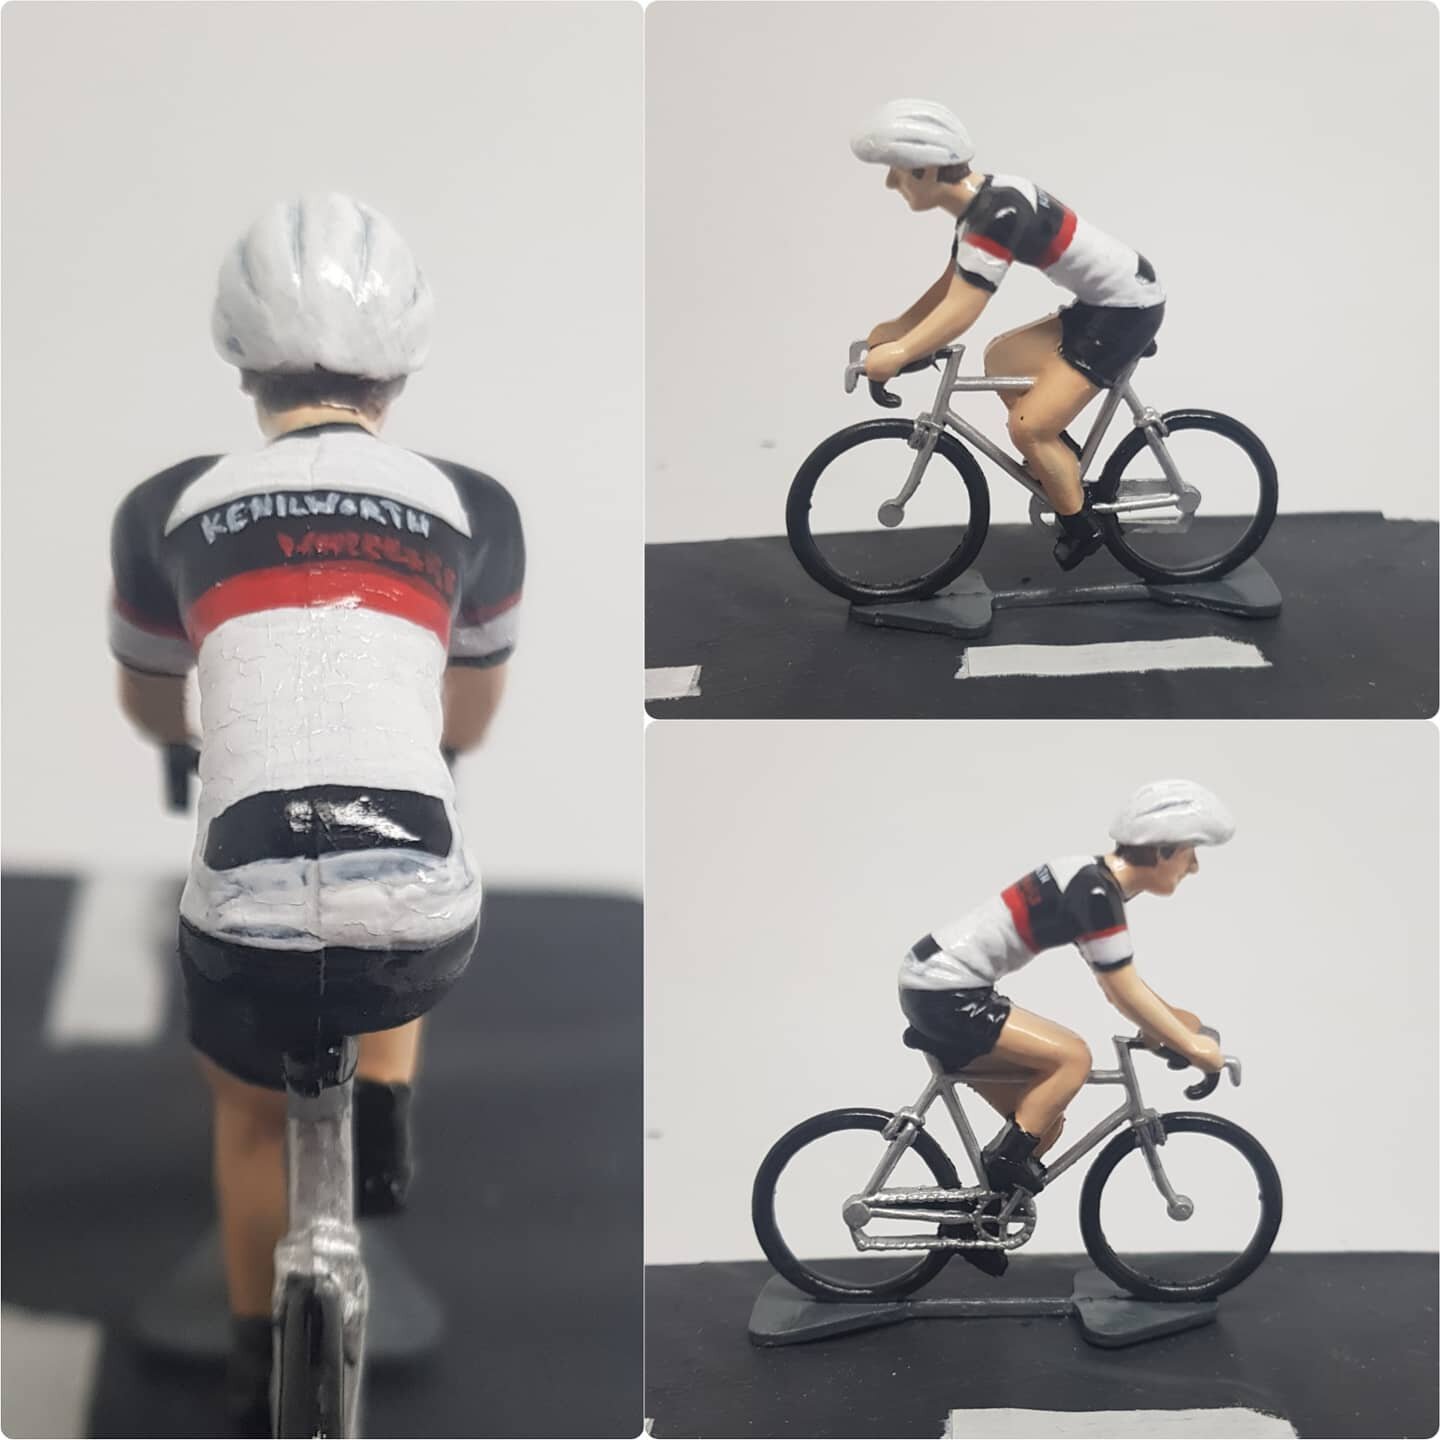 Real smart @kenilworth_wheelers Jersey with a sculpted helmet 🚴 This bespoke order was sent out with one of our small road strips, a cracking gift 🙌 #cycling #mini #cyclist #tourdefrance #tourdefrance2020 #painting #handpainted #design #miniature #